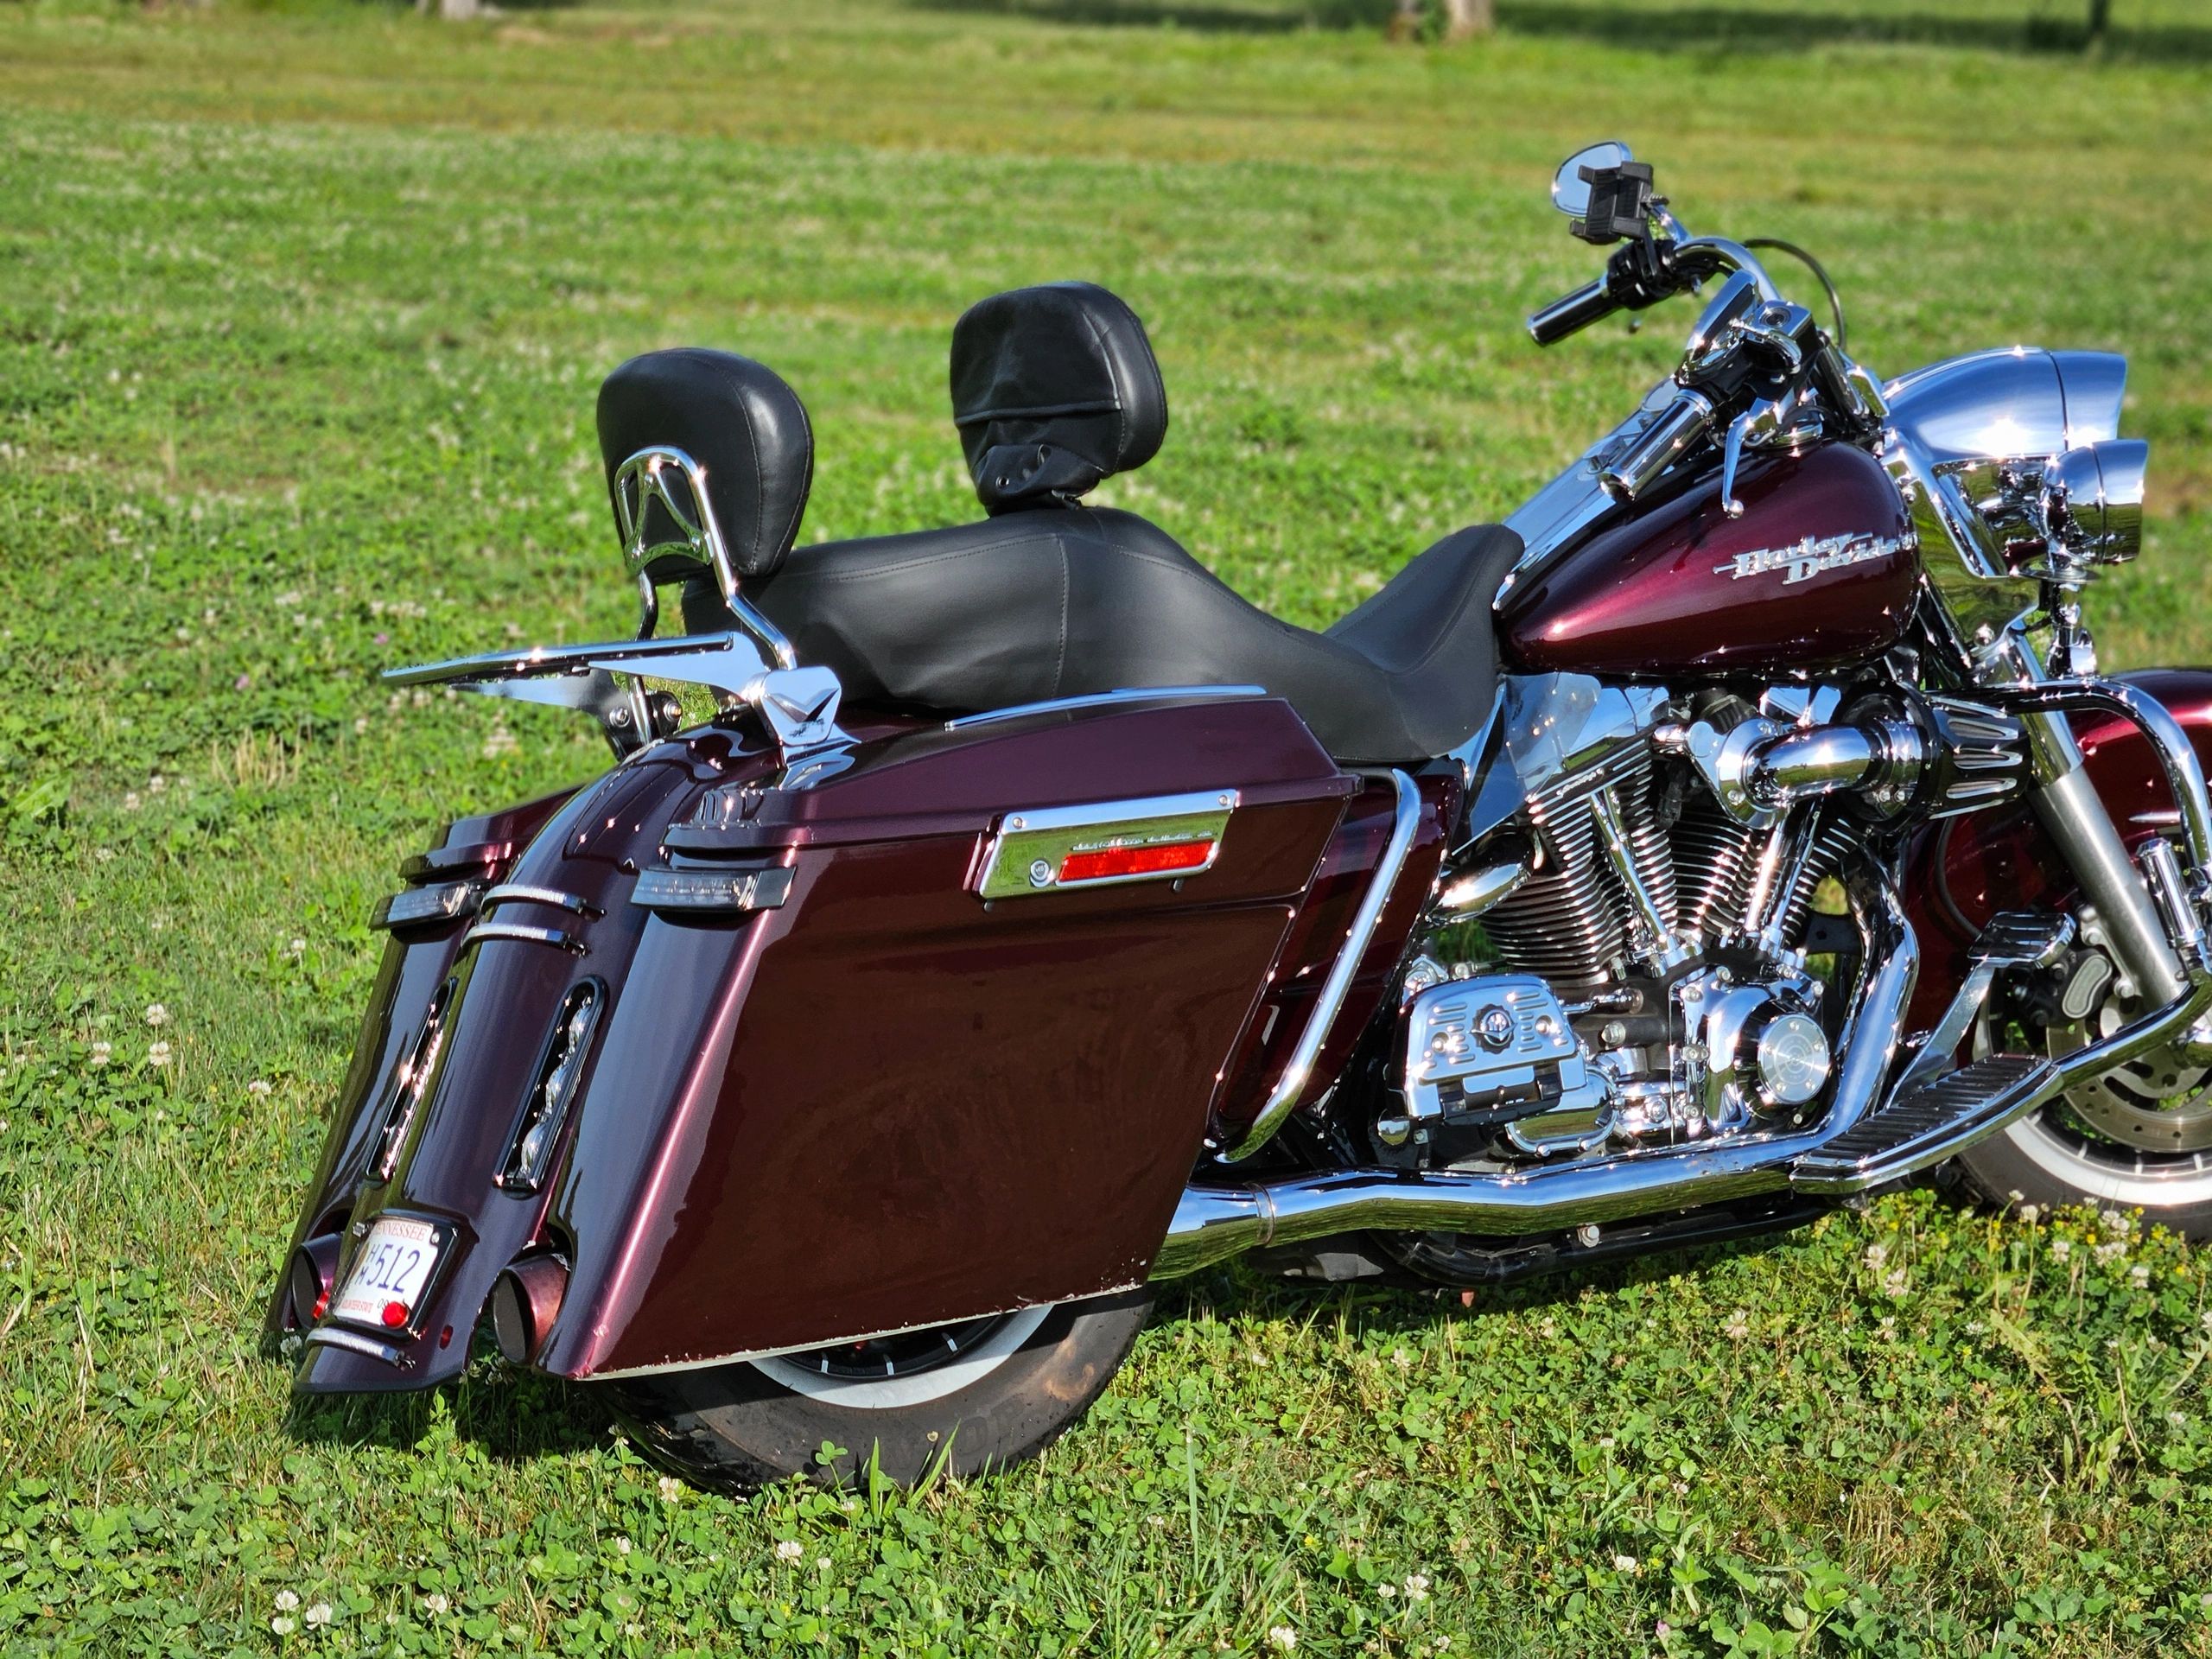 Harley Road King for rent in Maryville 
Freedom Rentals of TN www.FreedomRentalsTN.com 